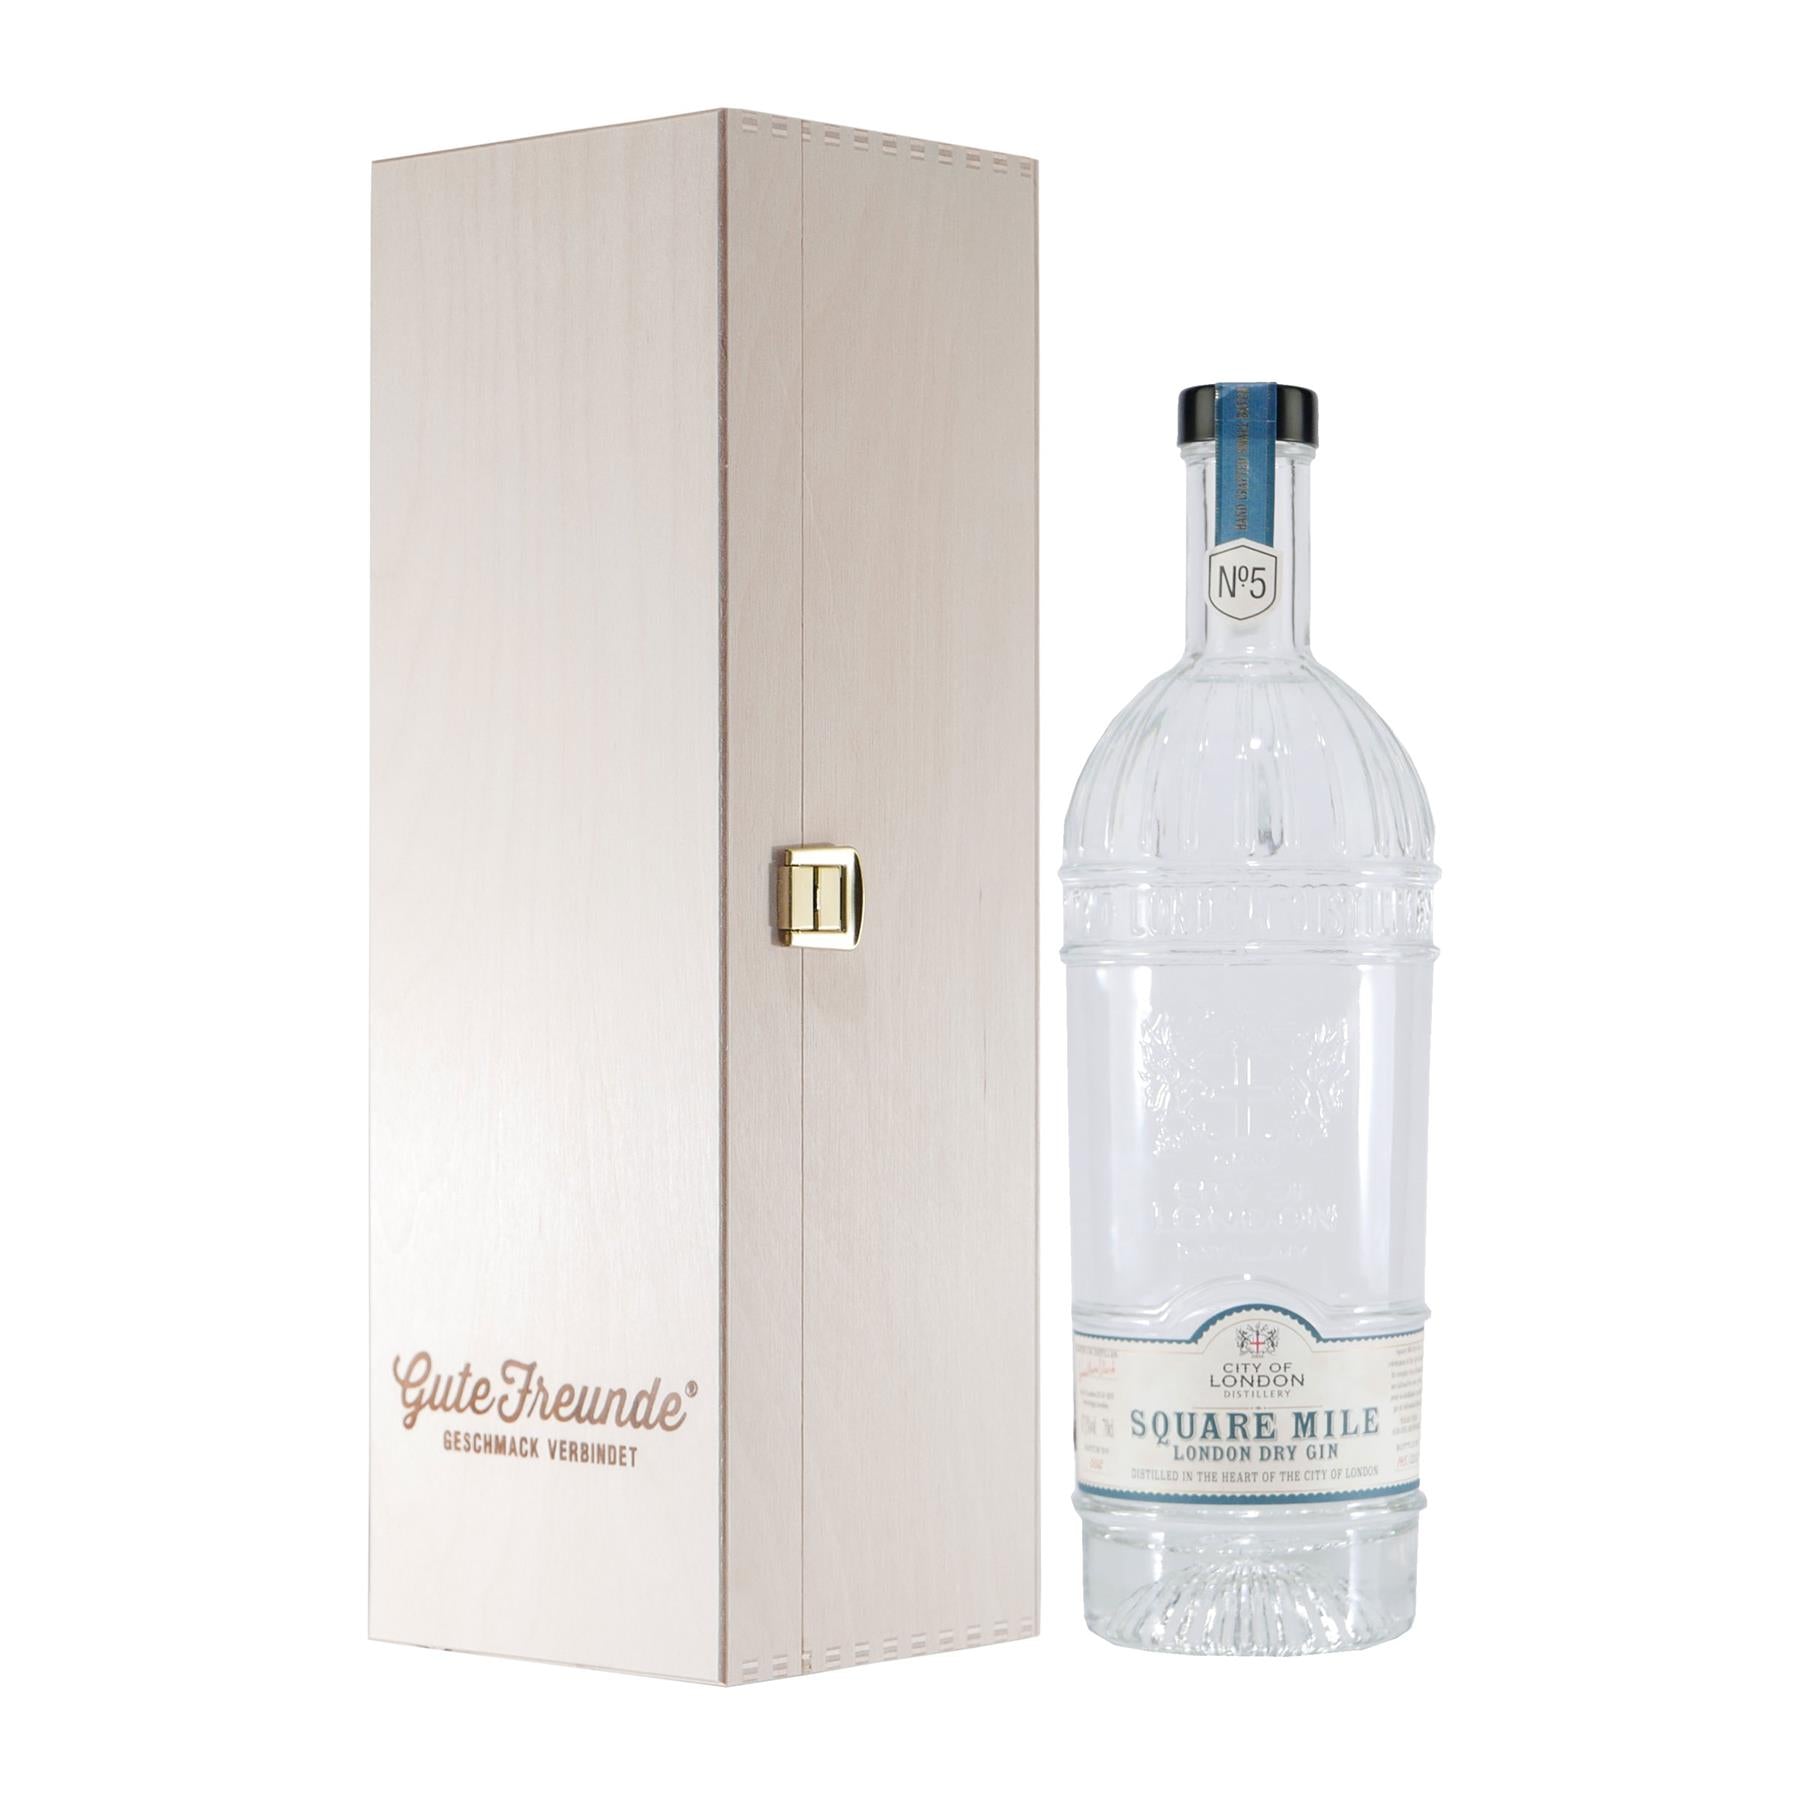 City of London Square Mile London Dry Gin mit Geschenk-HK